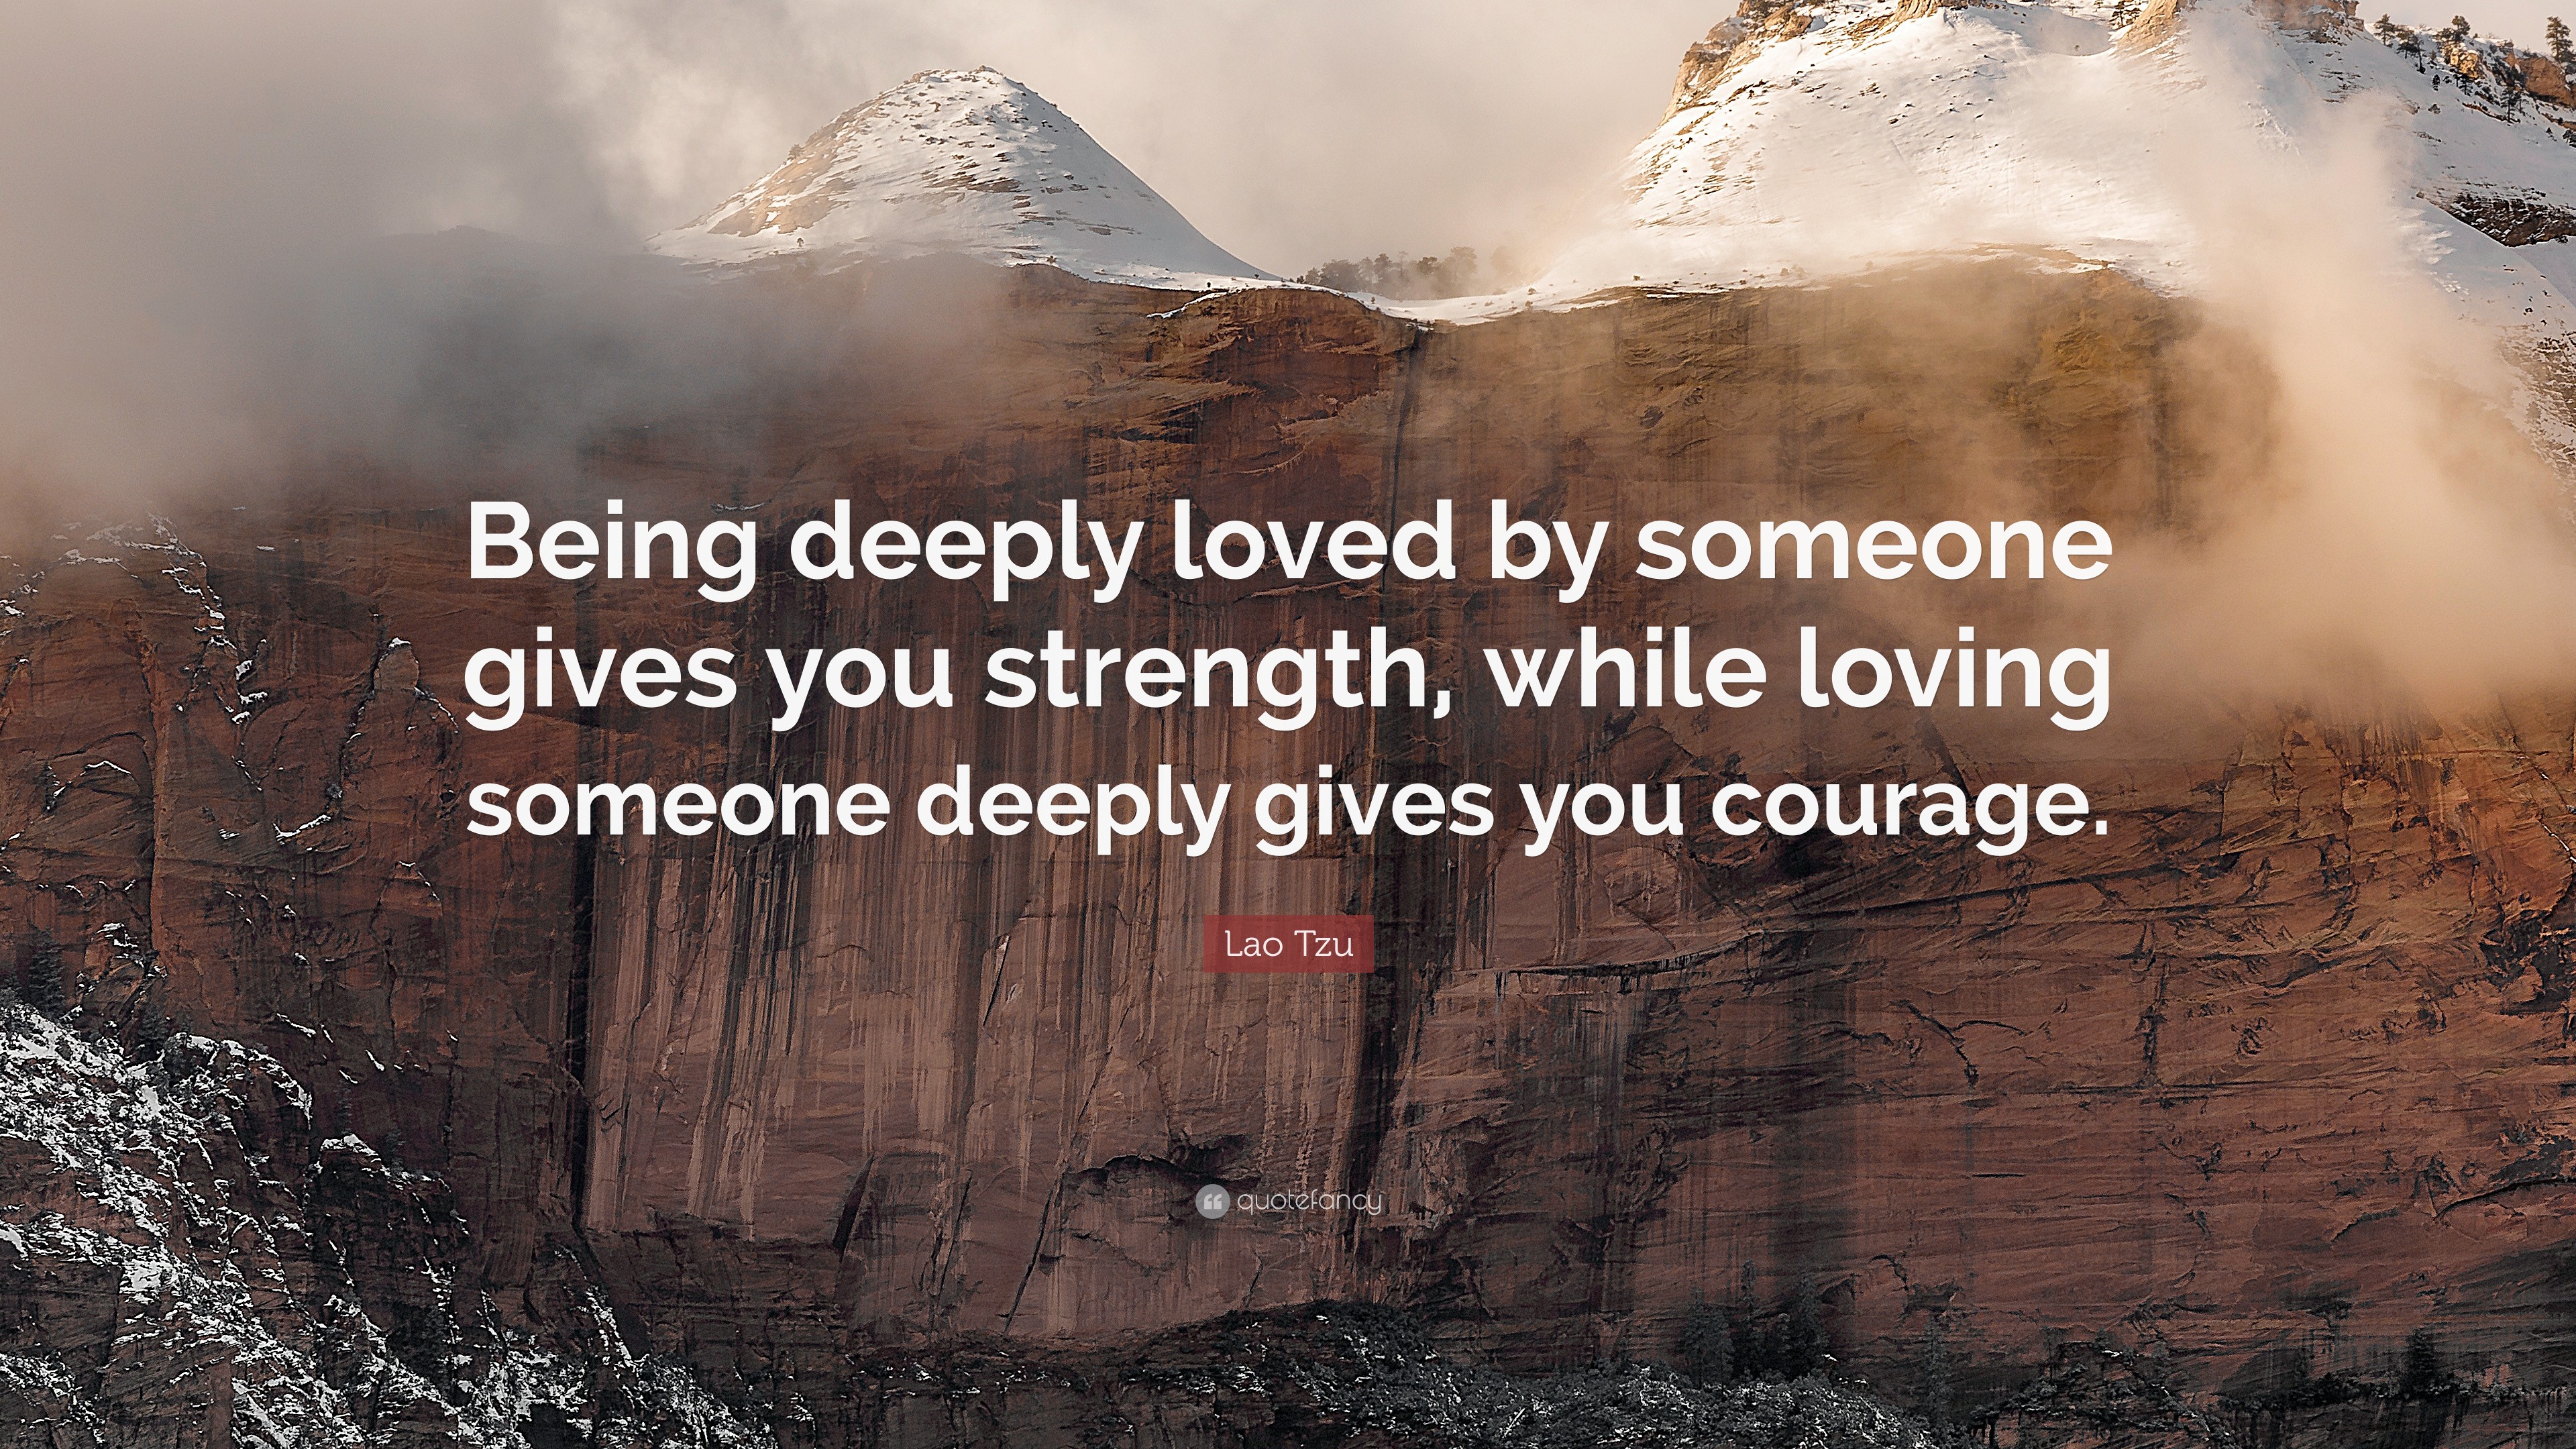 Lao Tzu Quote “being Deeply Loved By Someone Gives You Strength While Loving Someone Deeply